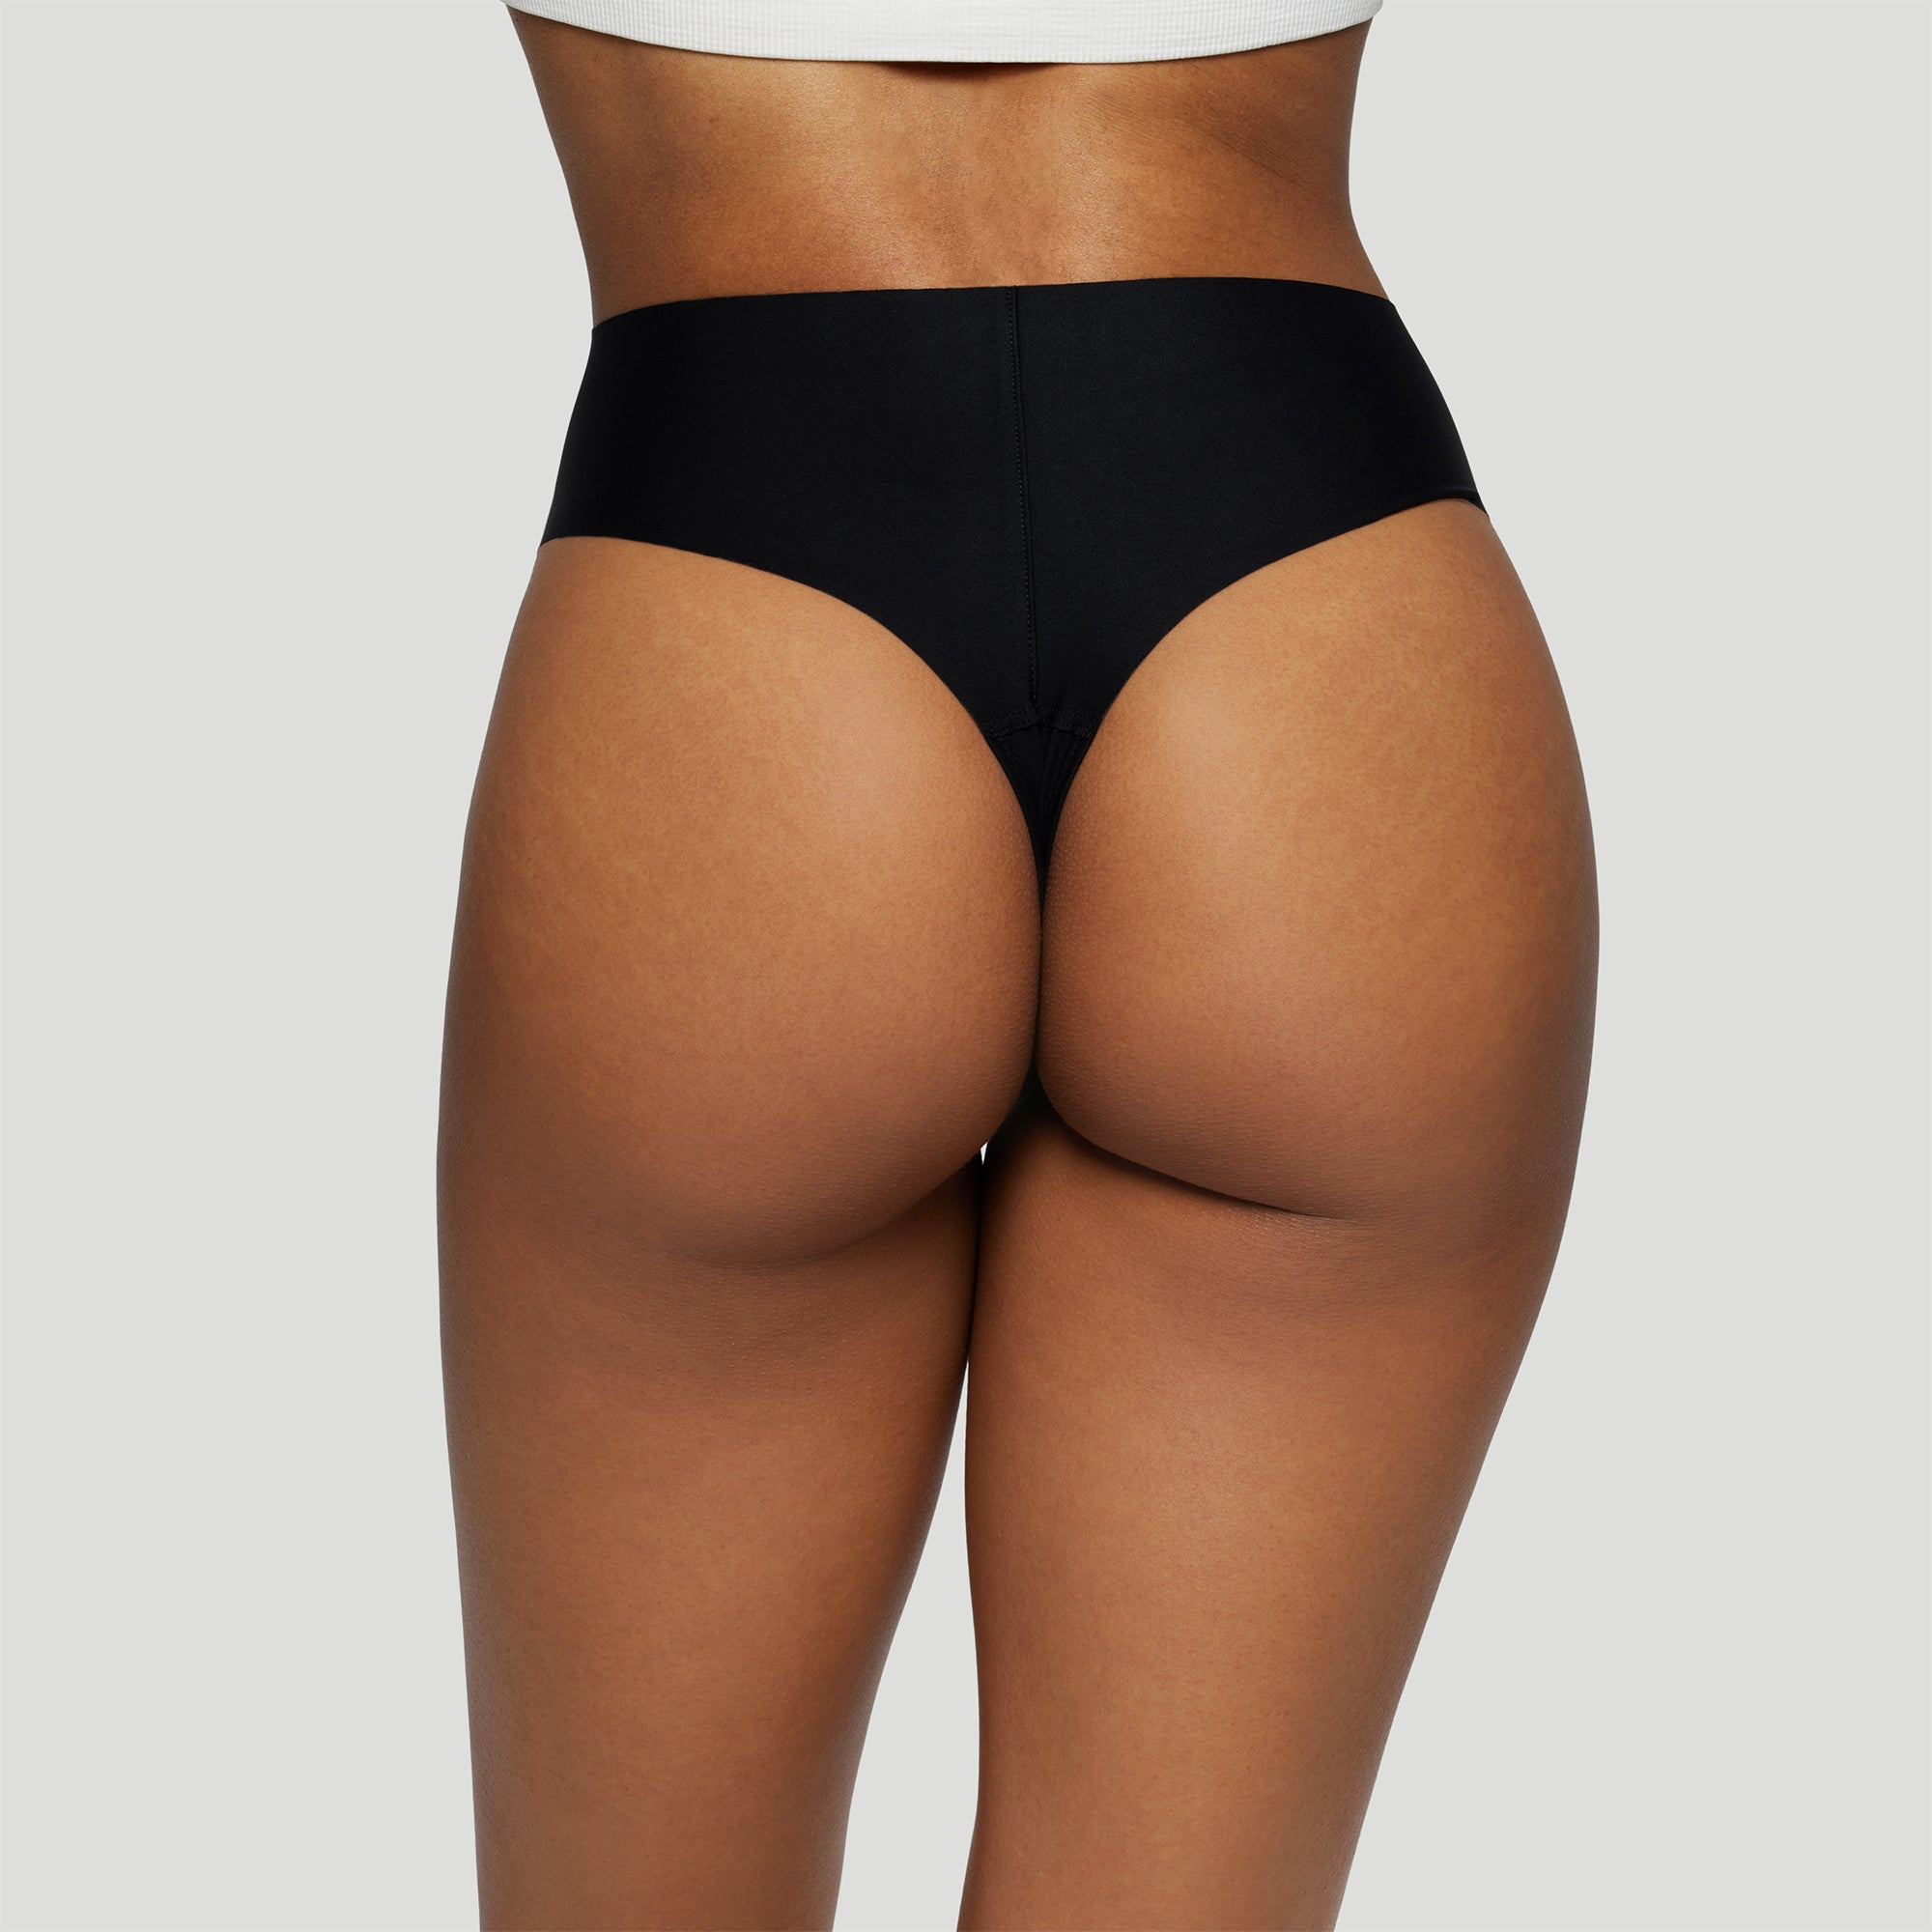 JIV ATHLETICS The Cameltoe Proof High Rise Thong in Black